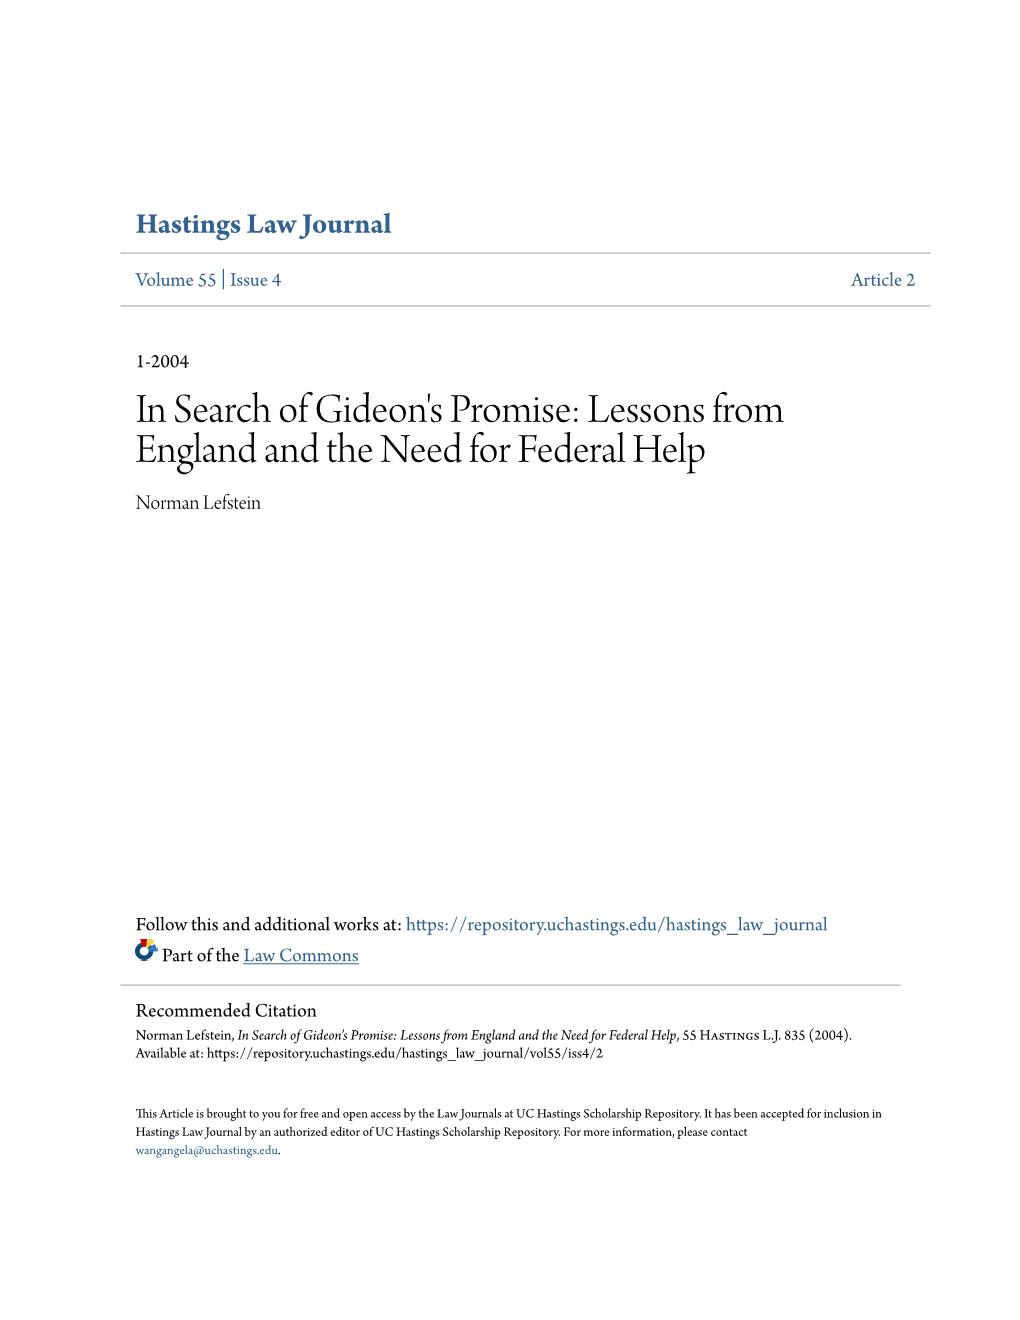 In Search of Gideon's Promise: Lessons from England and the Need for Federal Help Norman Lefstein